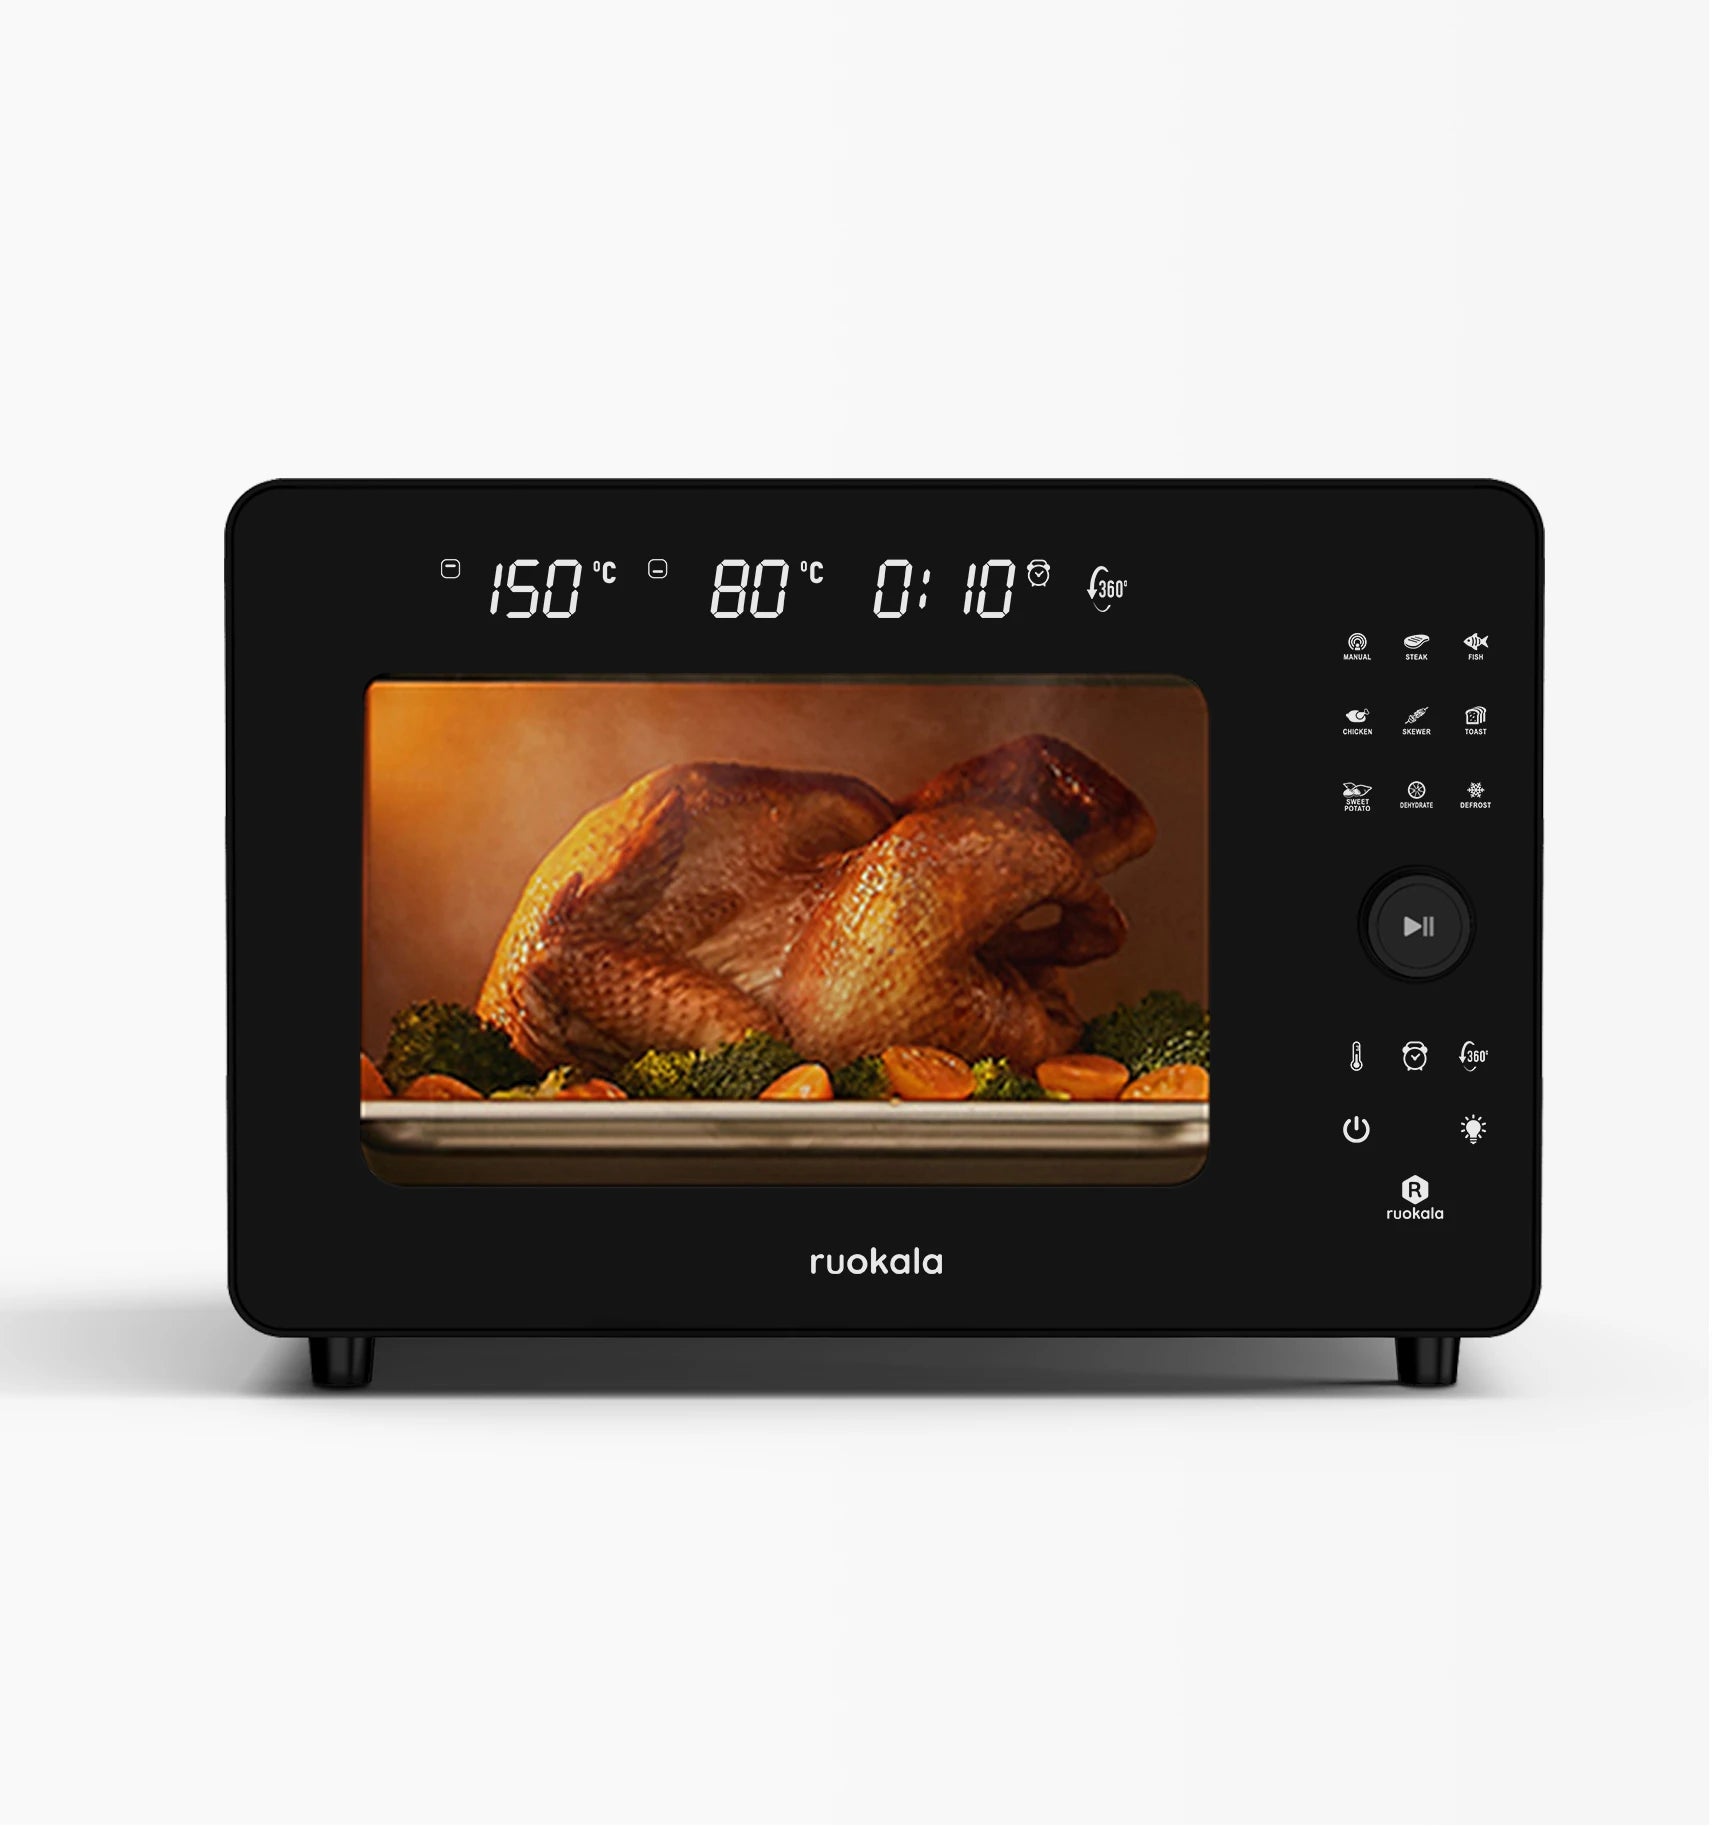 Ruokala air fryer perfectly roasting a chicken with a digital touchscreen interface for easy temperature and timer adjustments.